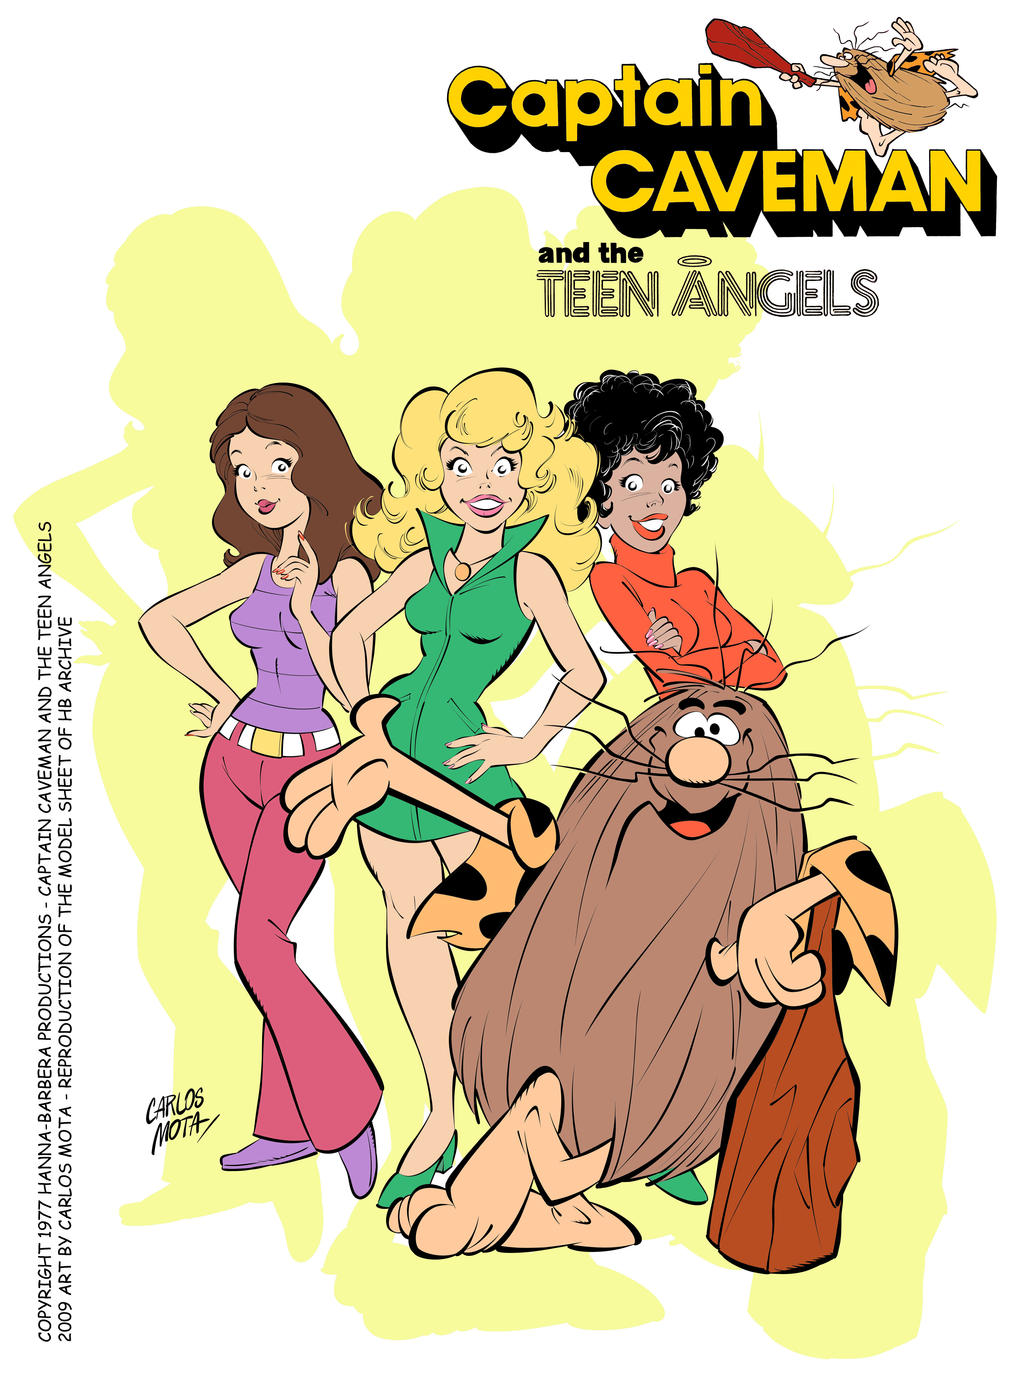 Captain Caveman and the Teen Angels by CarlosMota on DeviantArt